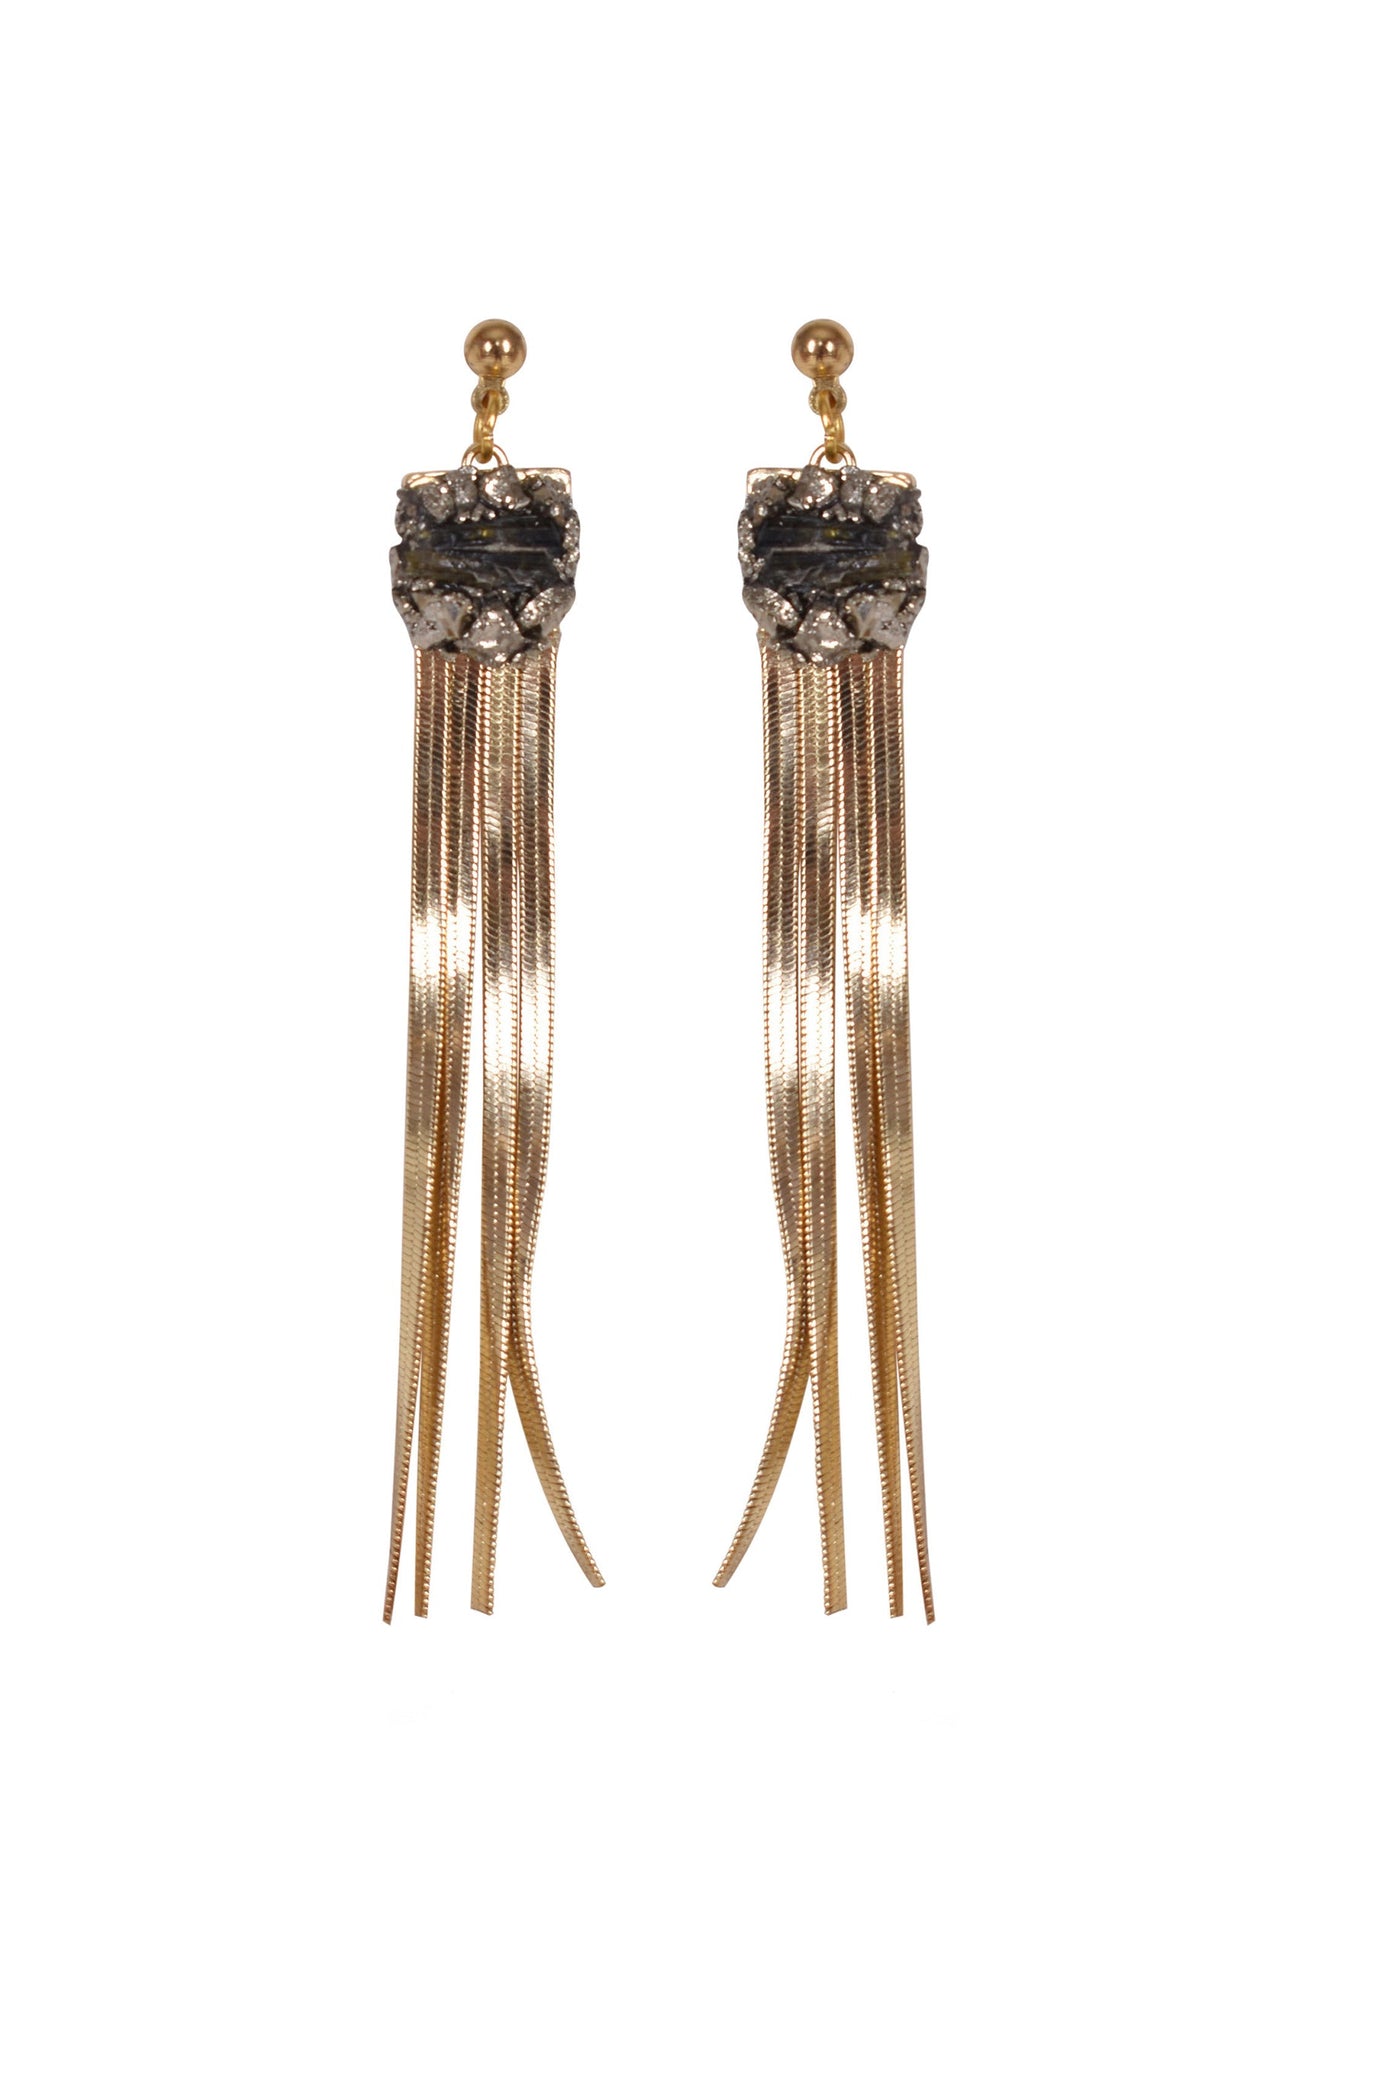 Marly Moretti Cluster Earring - Gold